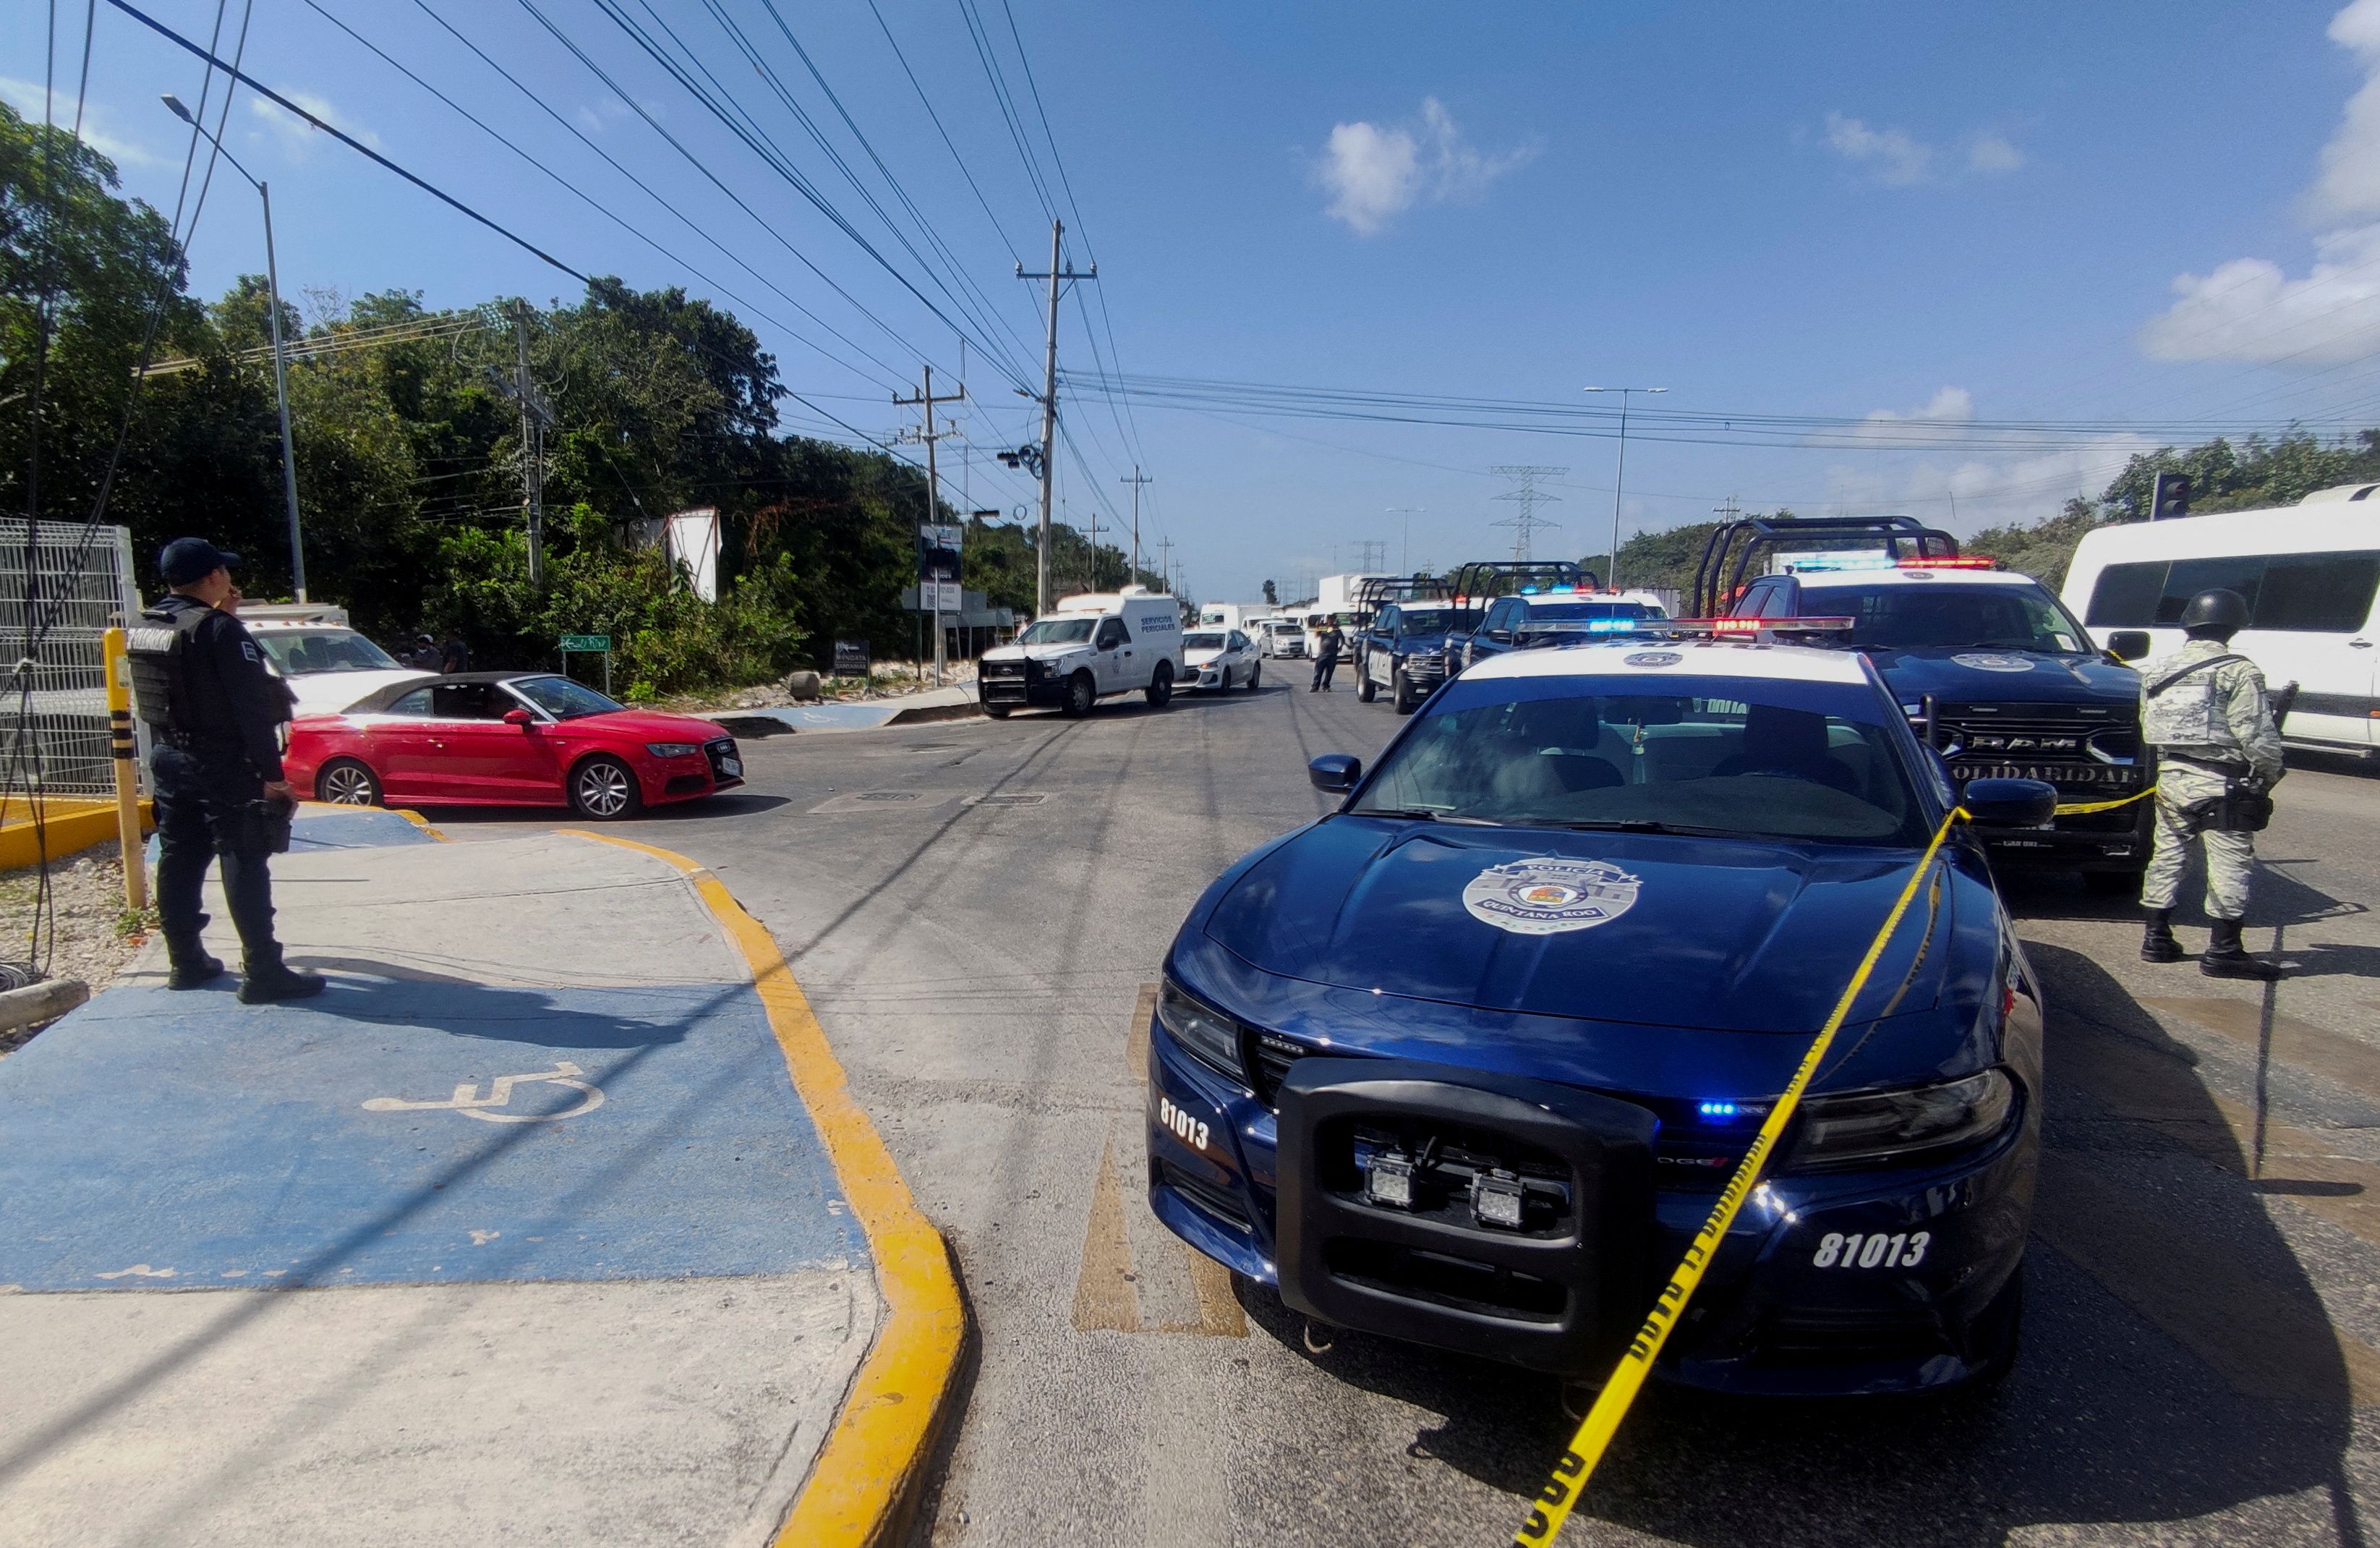 Members of security forces stand guard near the crime scene where the British businessman Chris Cleave, 54, was killed by a gunmen, according to local media, in Playa del Carmen